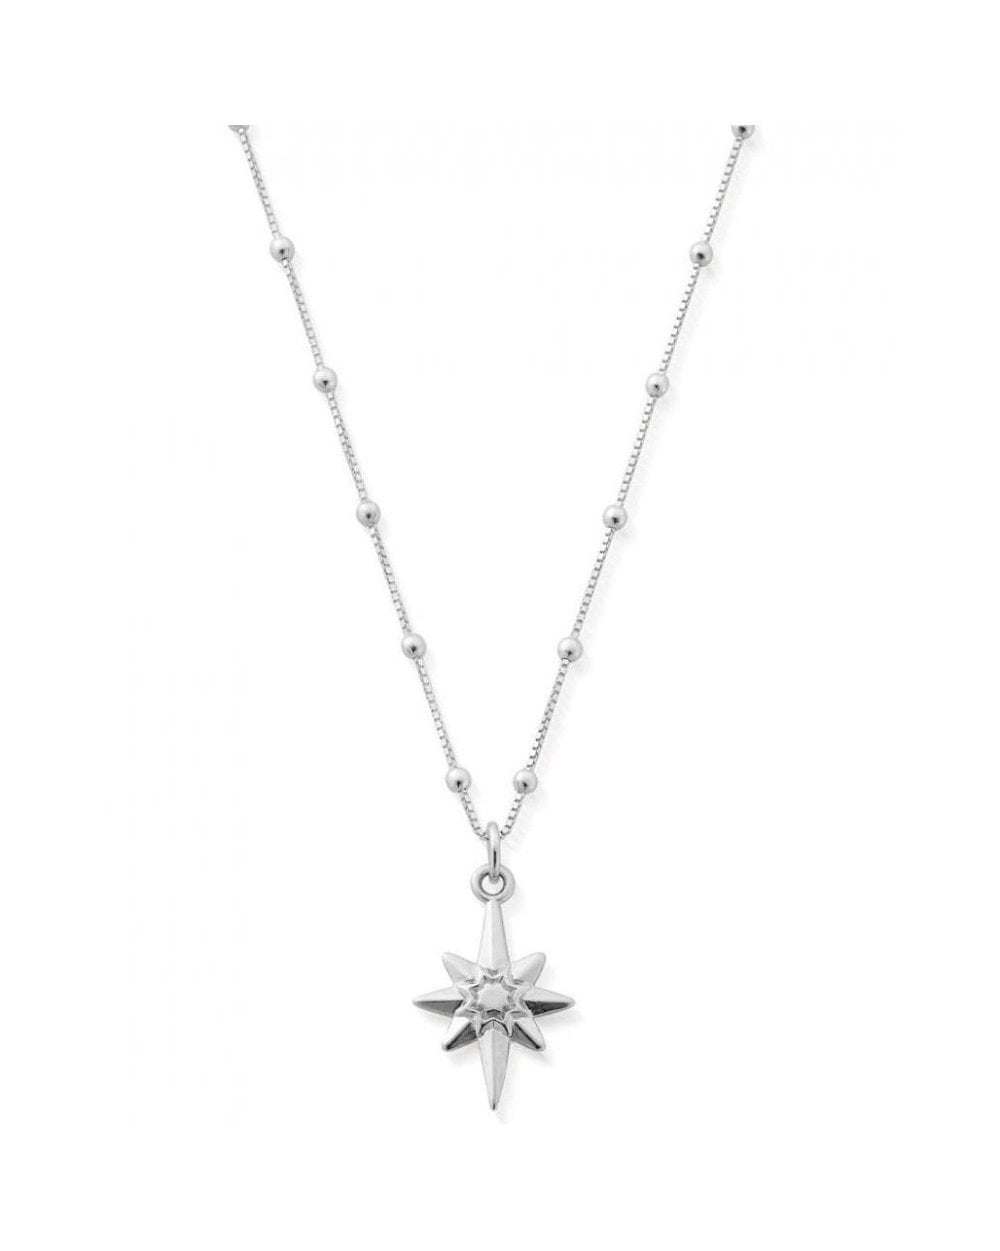 Bobble Chain Lucky Star Necklace